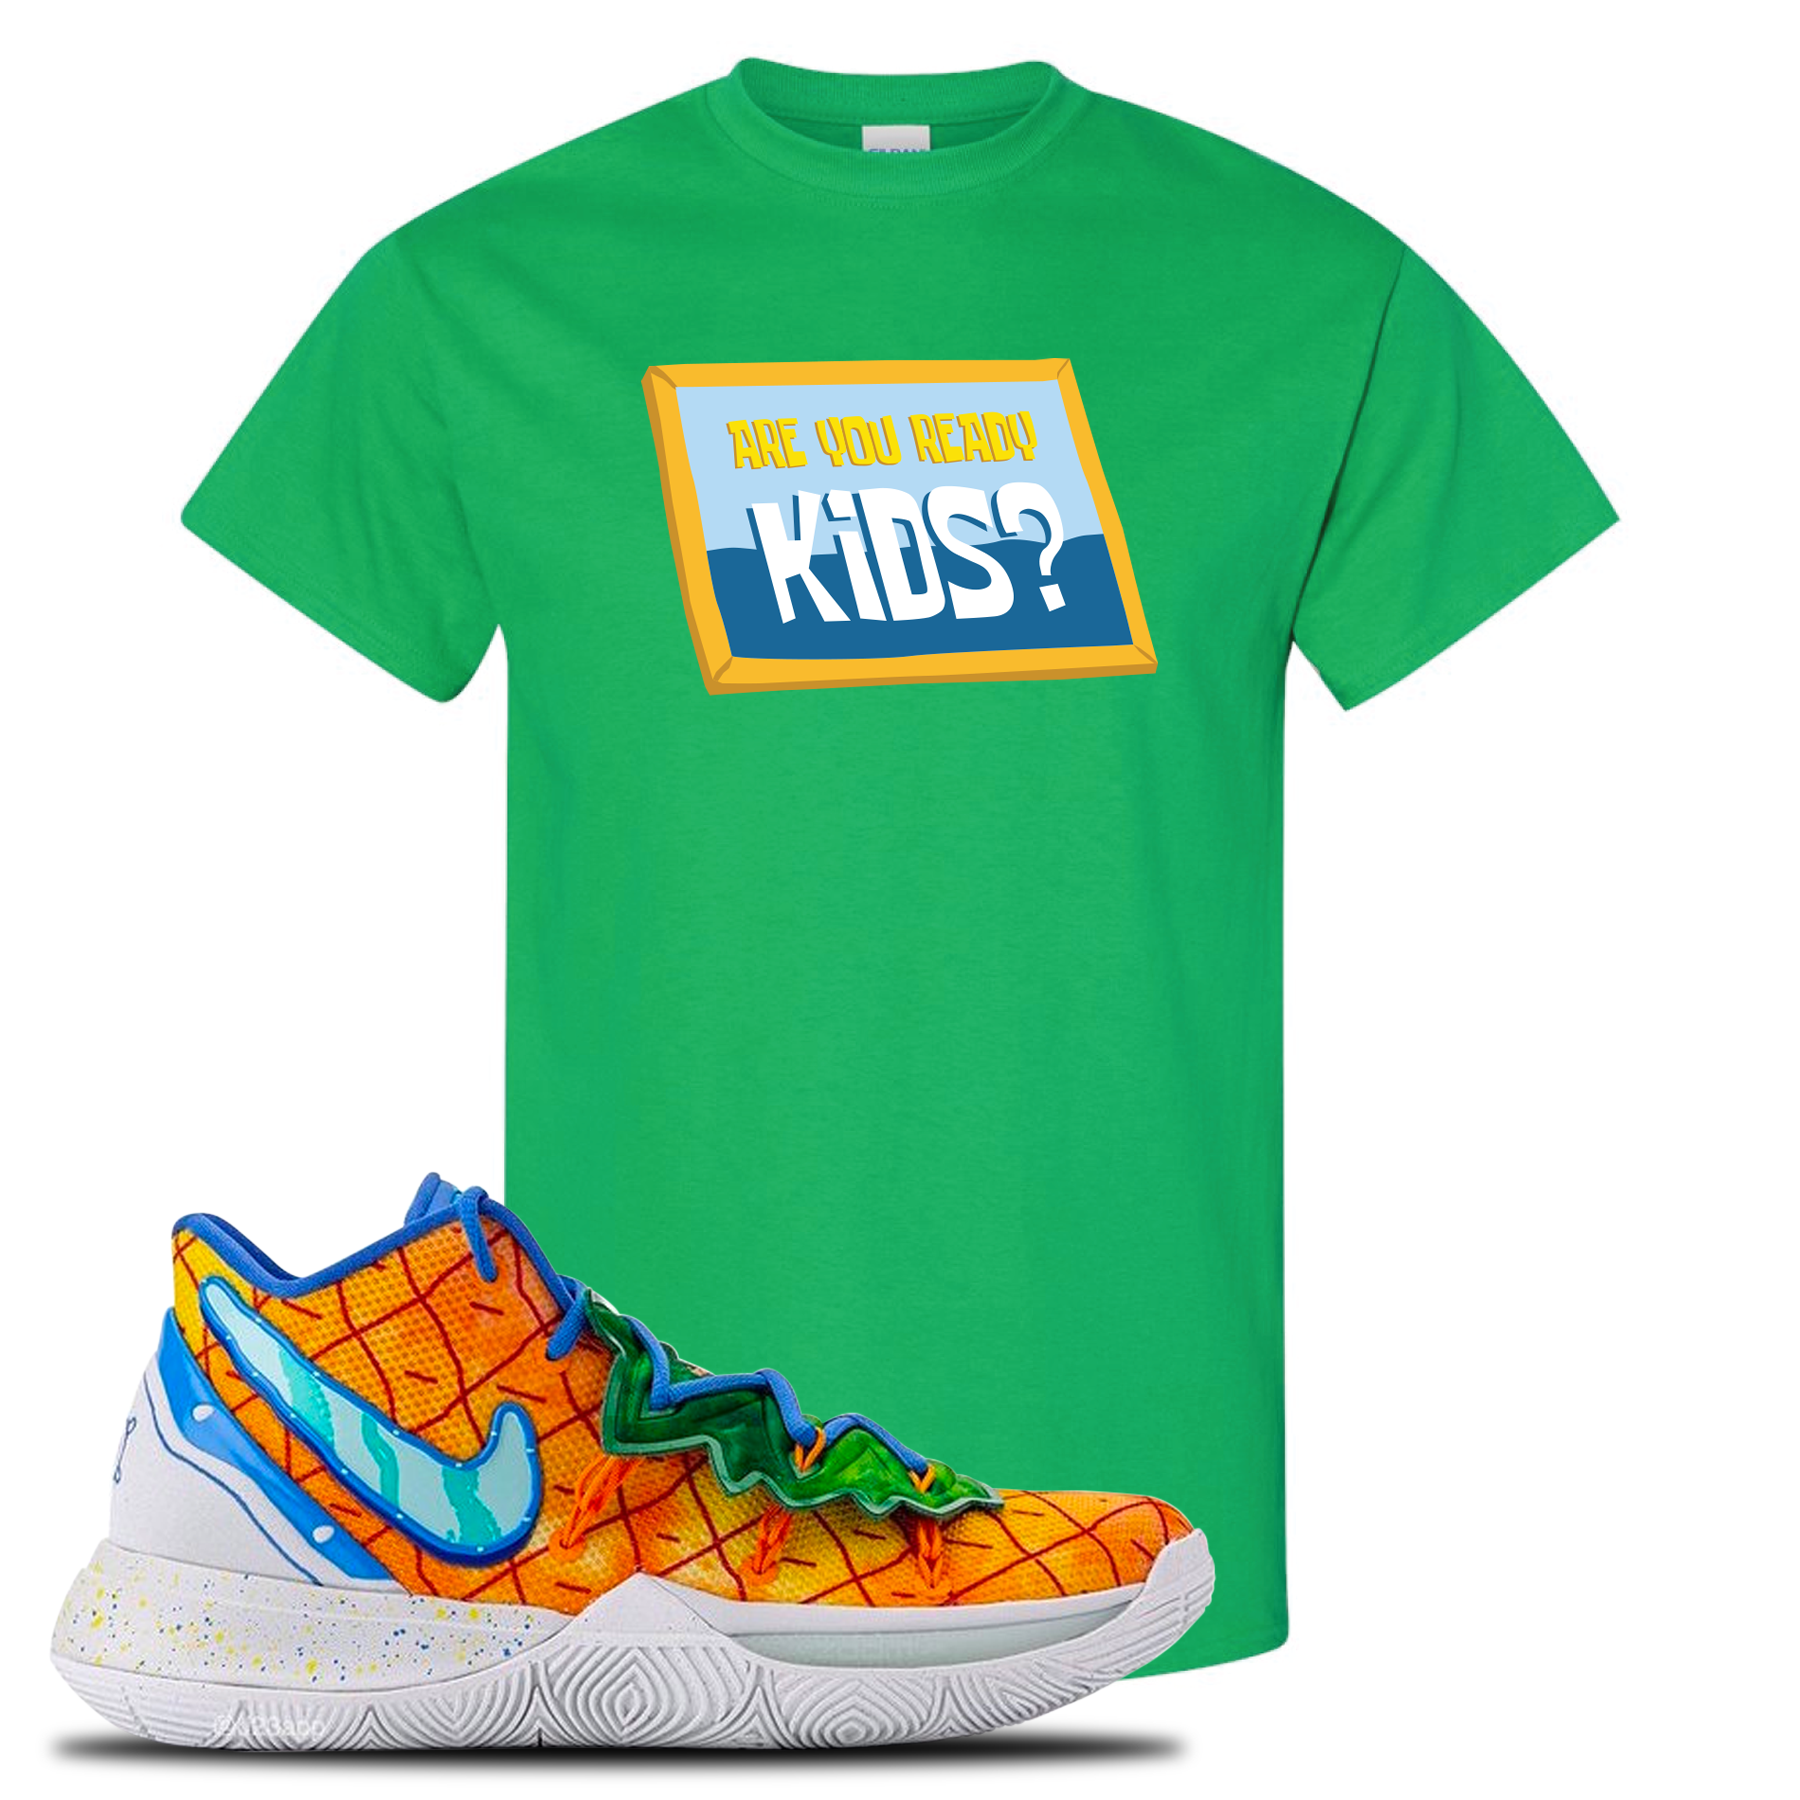 Kyrie 5 Pineapple House Are You Ready Kids? Irish Green Sneaker Hook Up T-Shirt